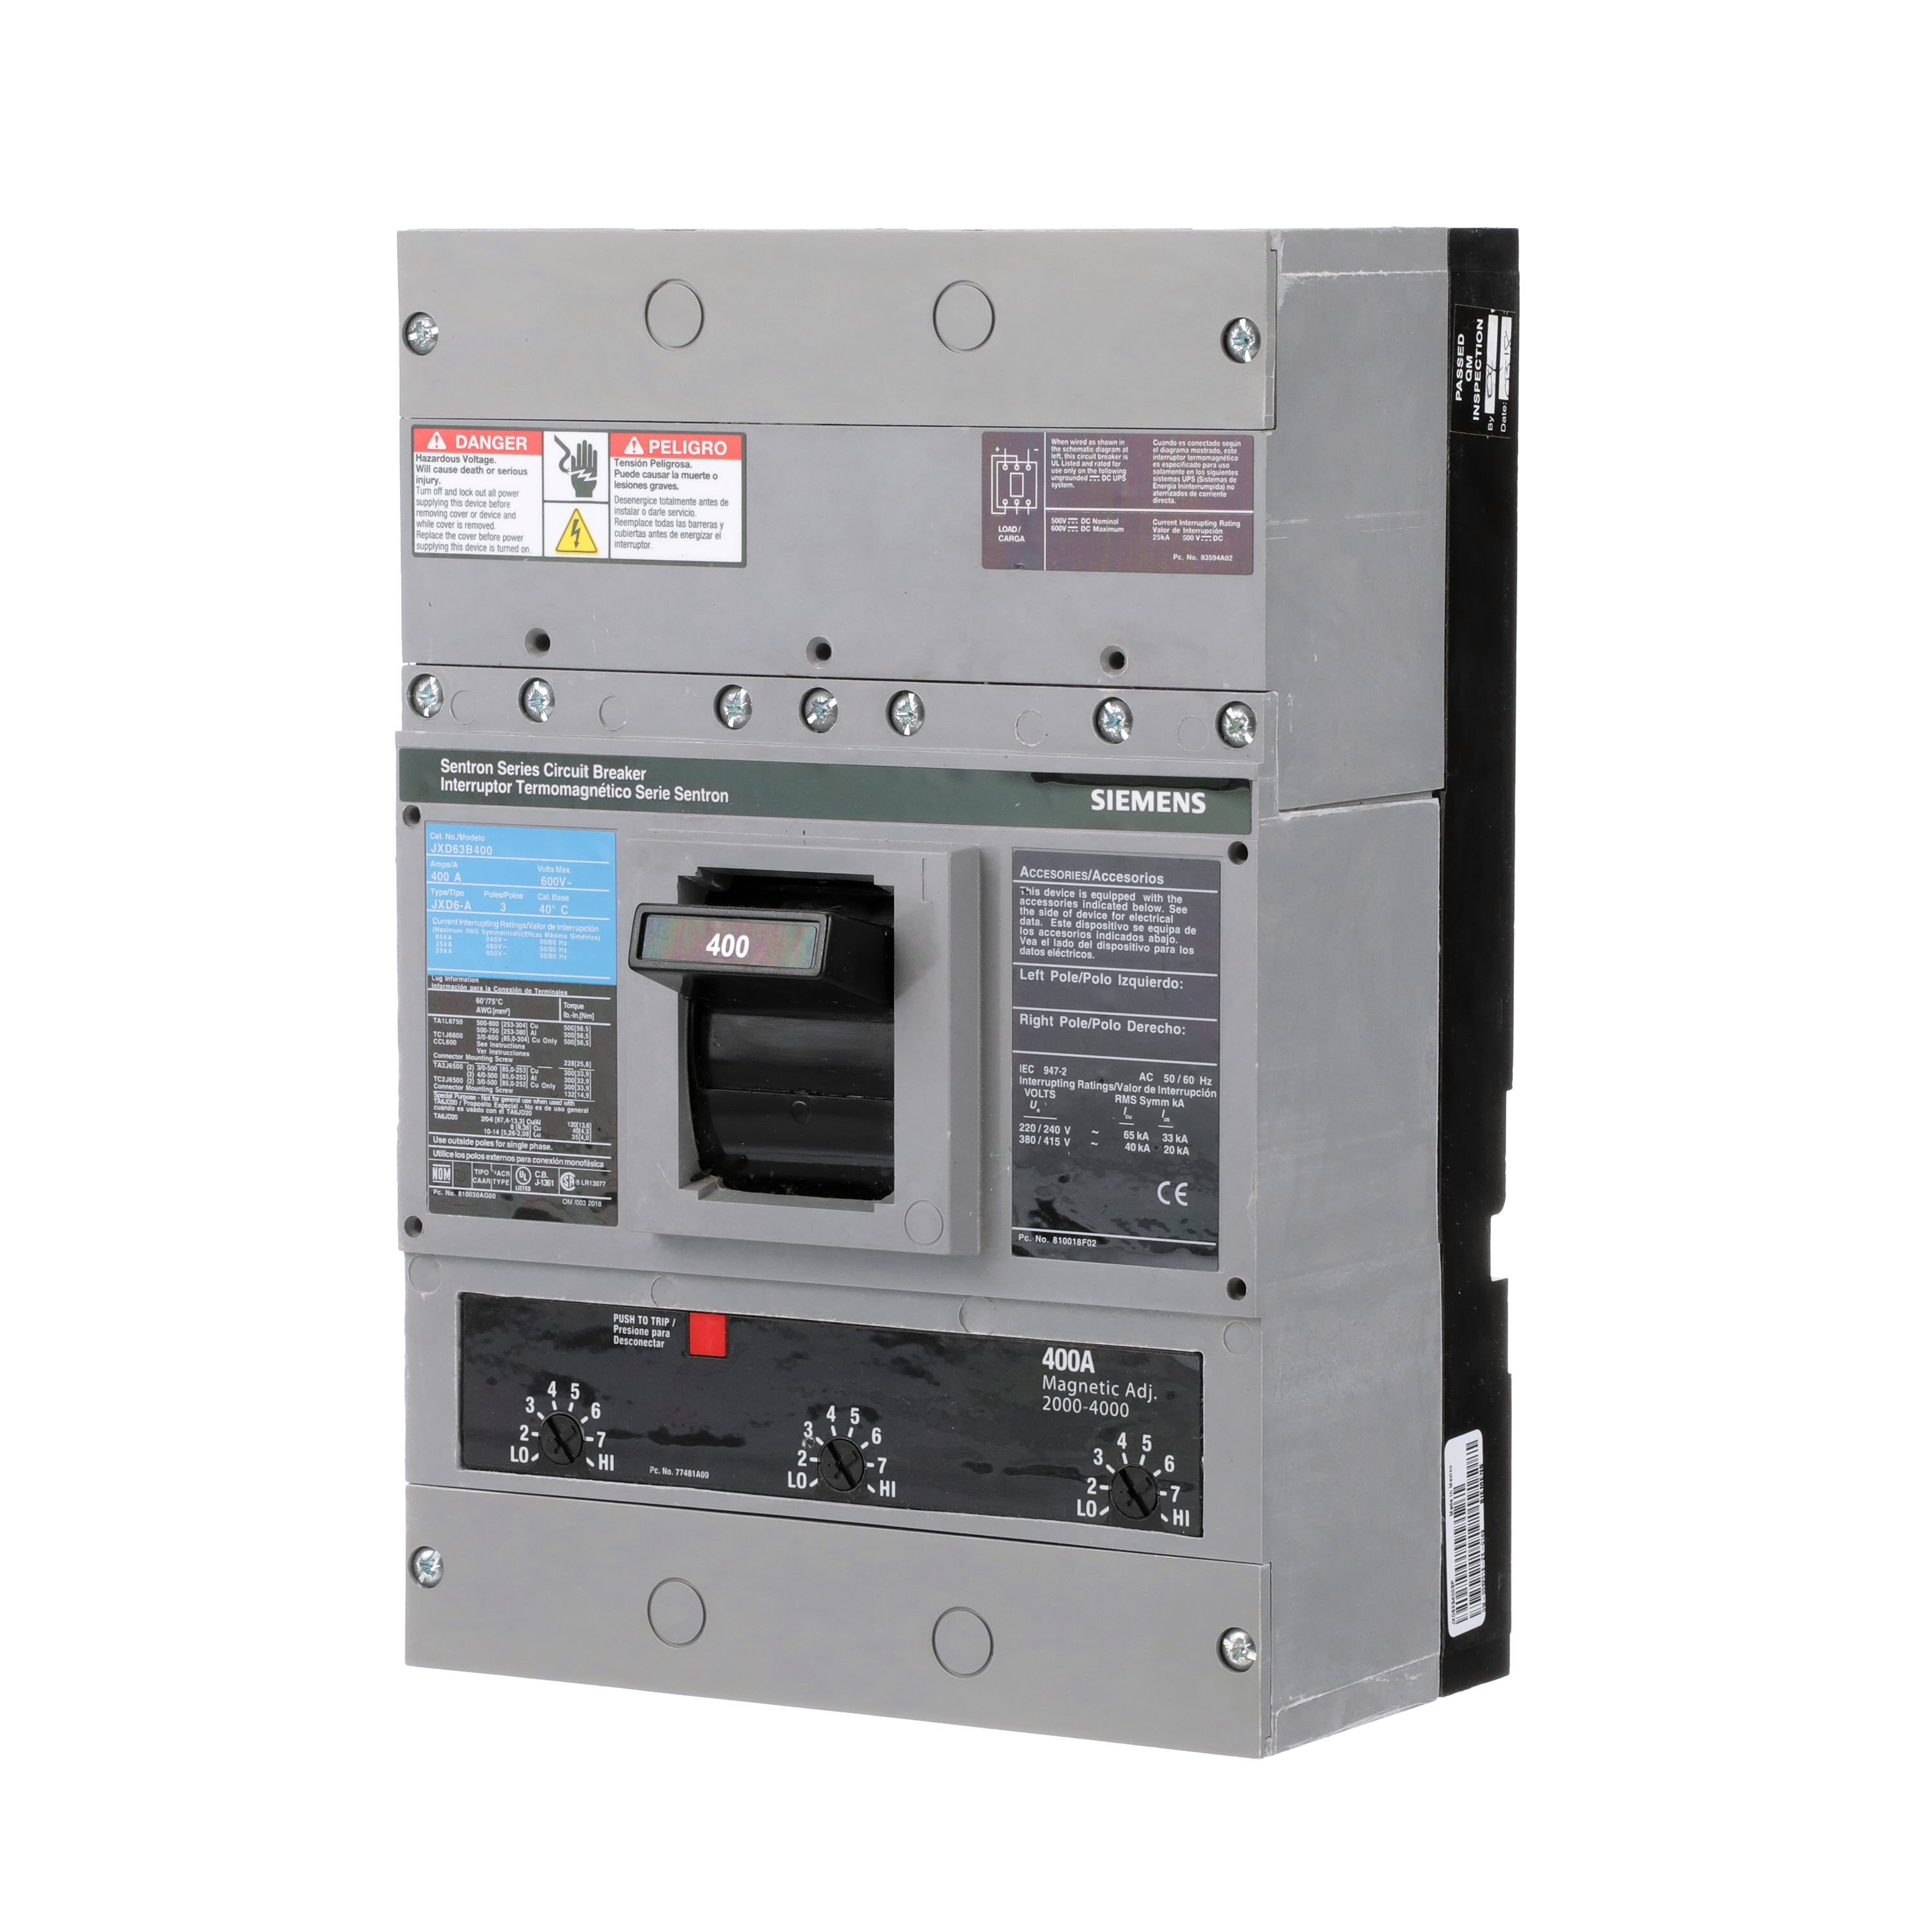 SIEMENS LOW VOLTAGE SENTRON MOLDED CASE CIRCUIT BREAKER WITH THERMAL - MAGNETICTRIP UNIT. ASSEMBLED STANDARD 40 DEG C BREAKER JD FRAME WITH STANDARD BREAKING CAPACITY. 400A 3-POLE (25KAIC AT 600V) (35KAIC AT 480V). NON-INTERCHANGEABLE TRIP UNIT. SPECIAL FEATURES VALUE PACK, NO LUGS INSTALLED. DIMENSIONS (W x H x D) IN 7.50 x 11.0 x 4.00.